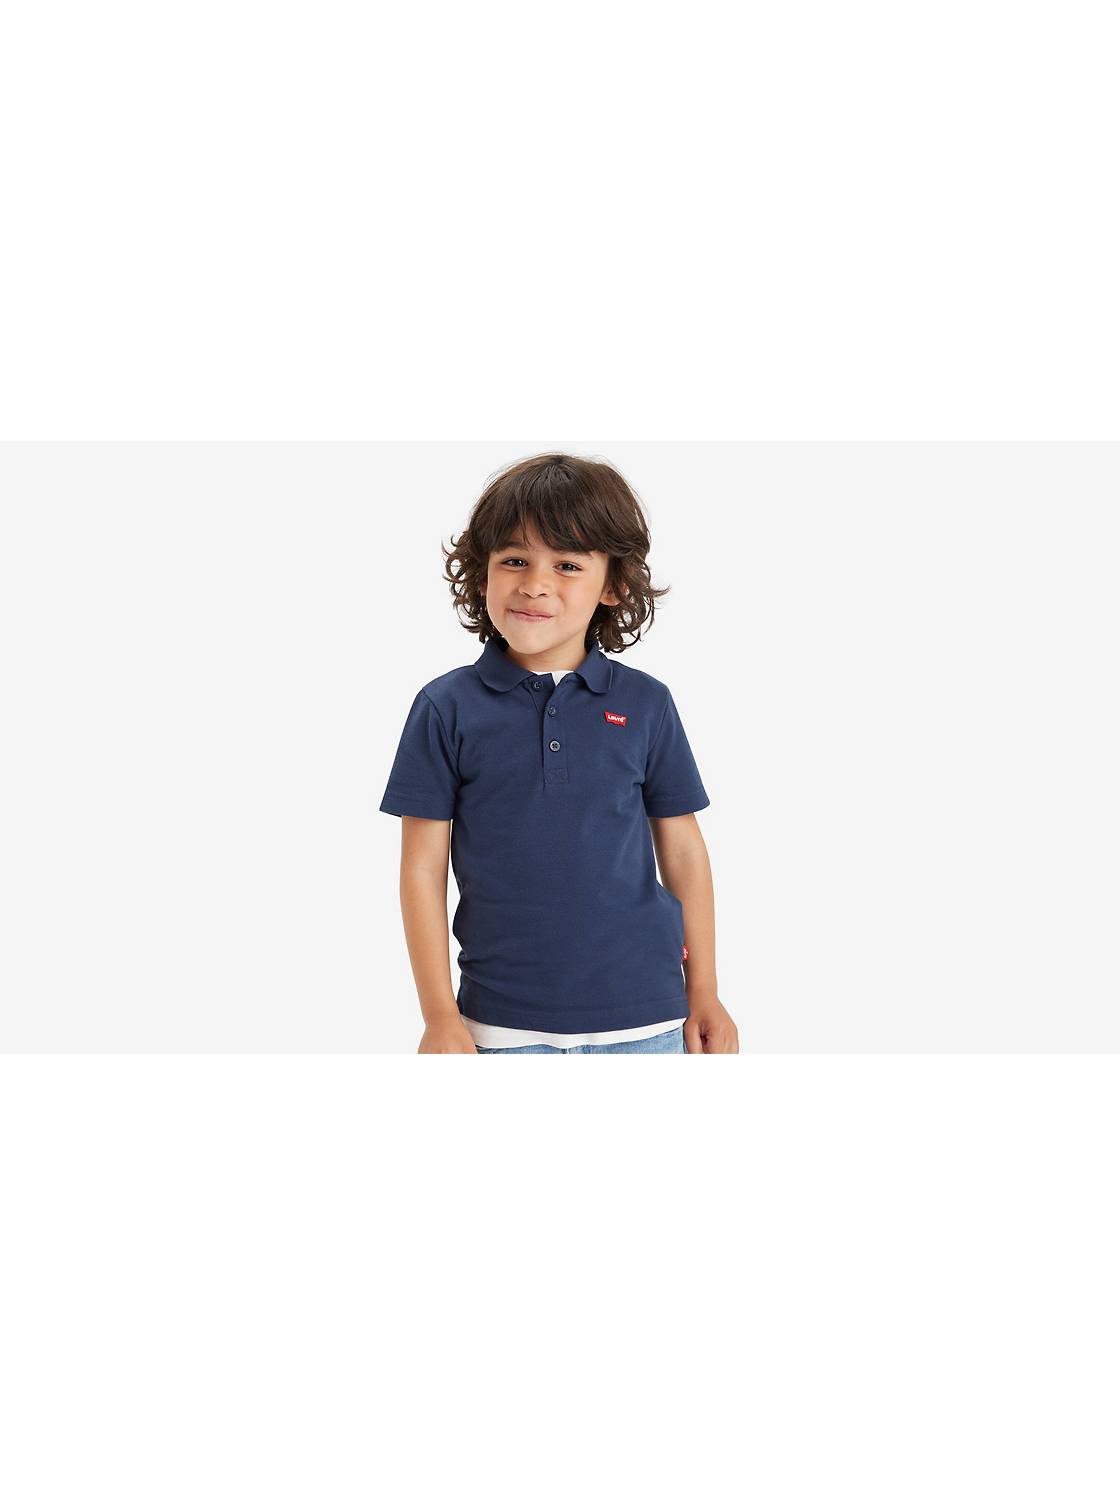 Kids Clothing | Levi's® AT